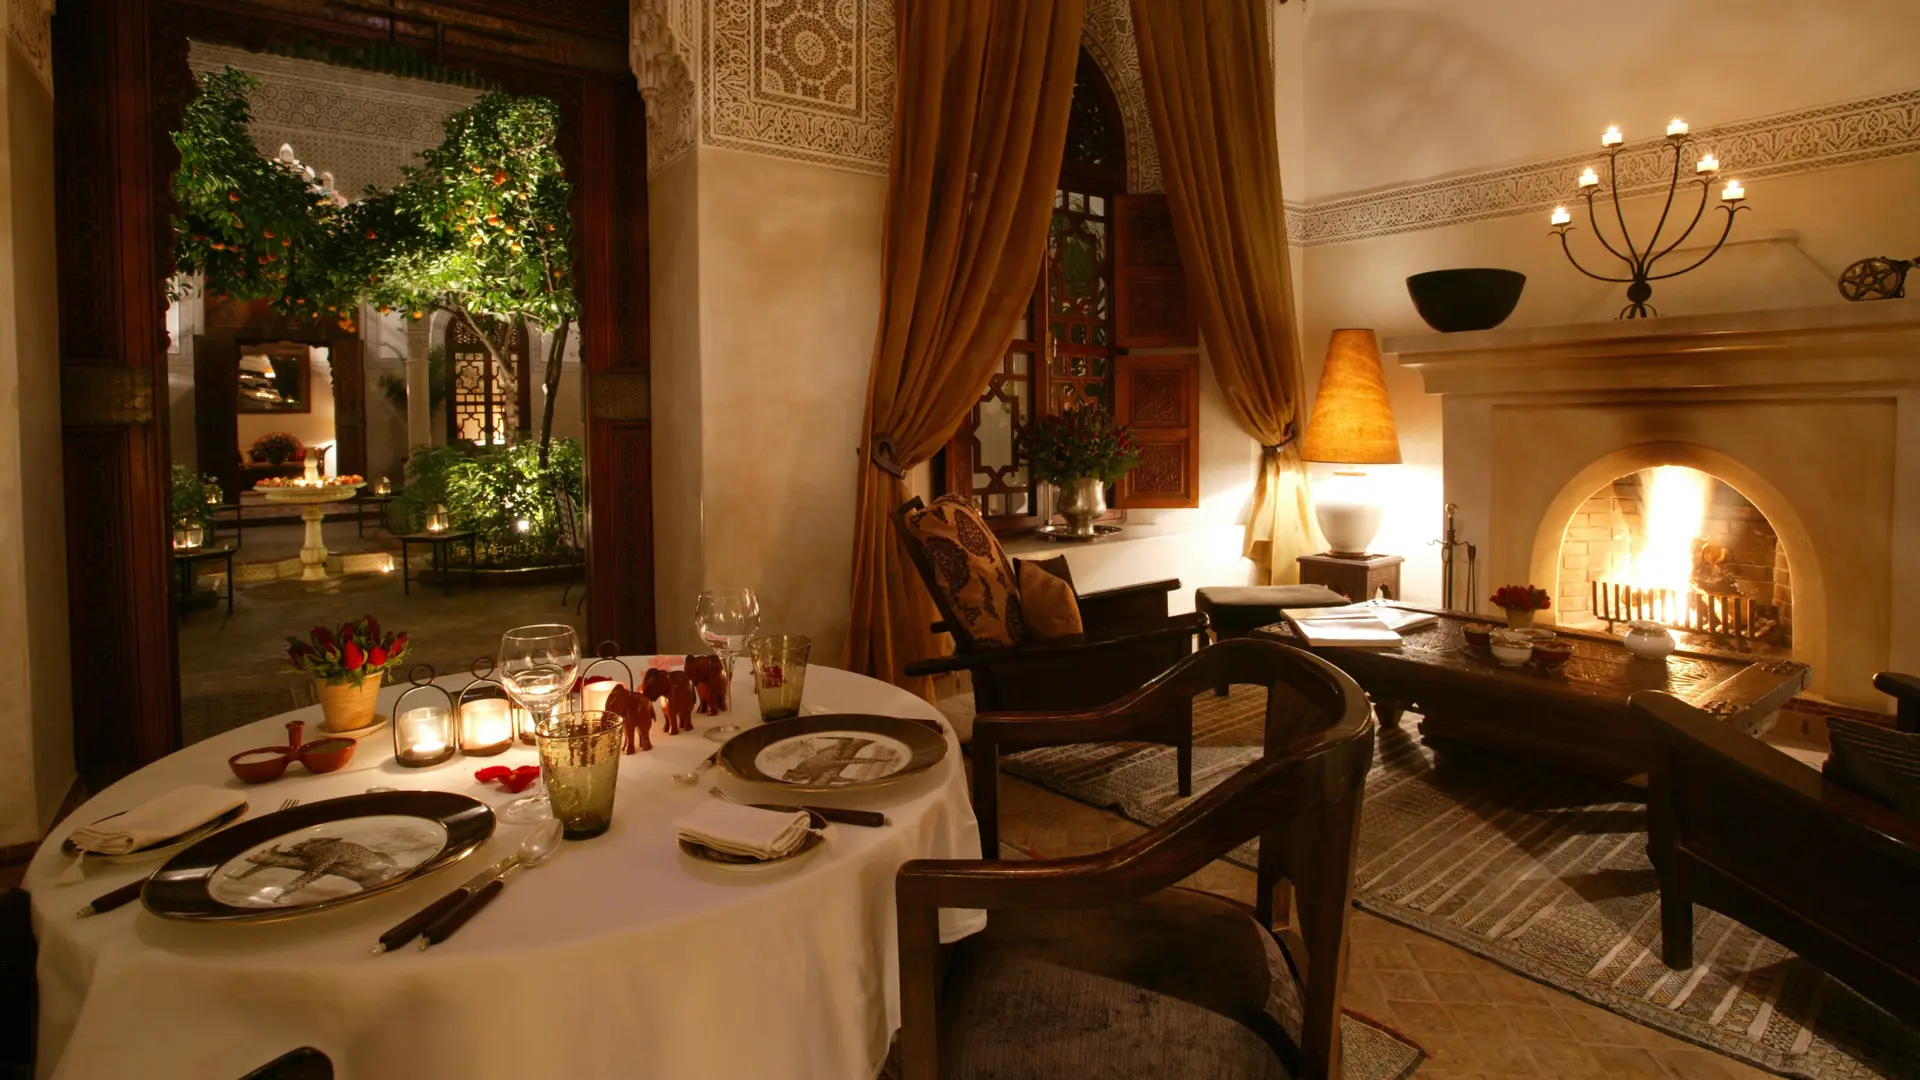 A private dining room with ancient wall engravings and a fireplace area with seats